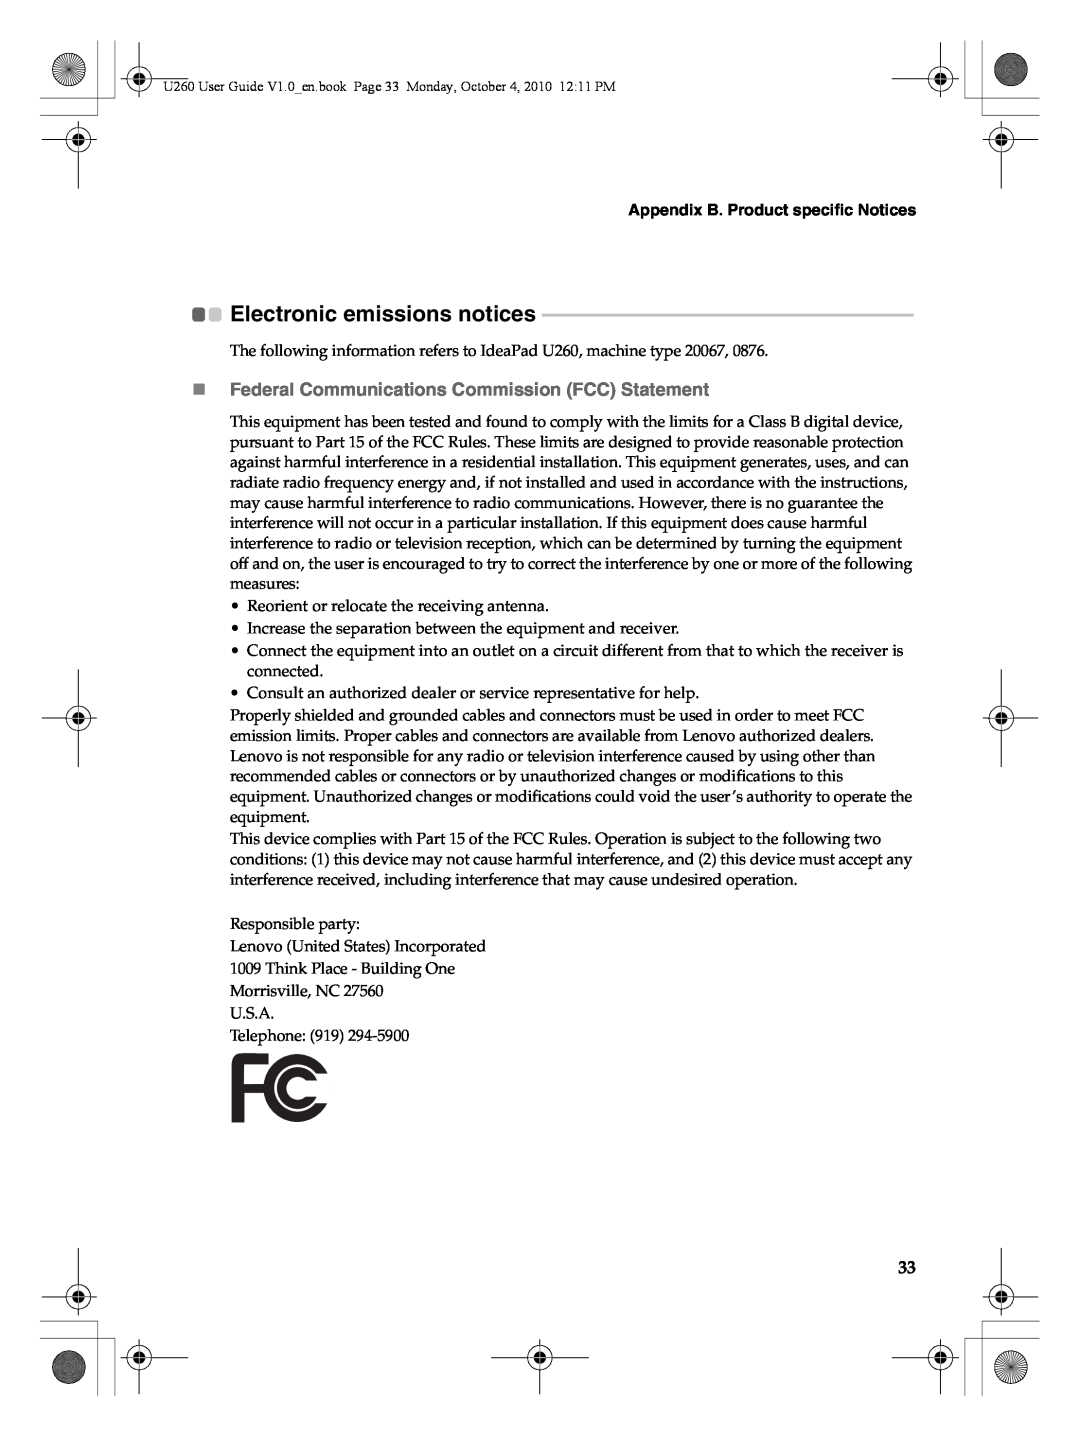 Lenovo U260 manual Electronic emissions notices, „Federal Communications Commission FCC Statement 